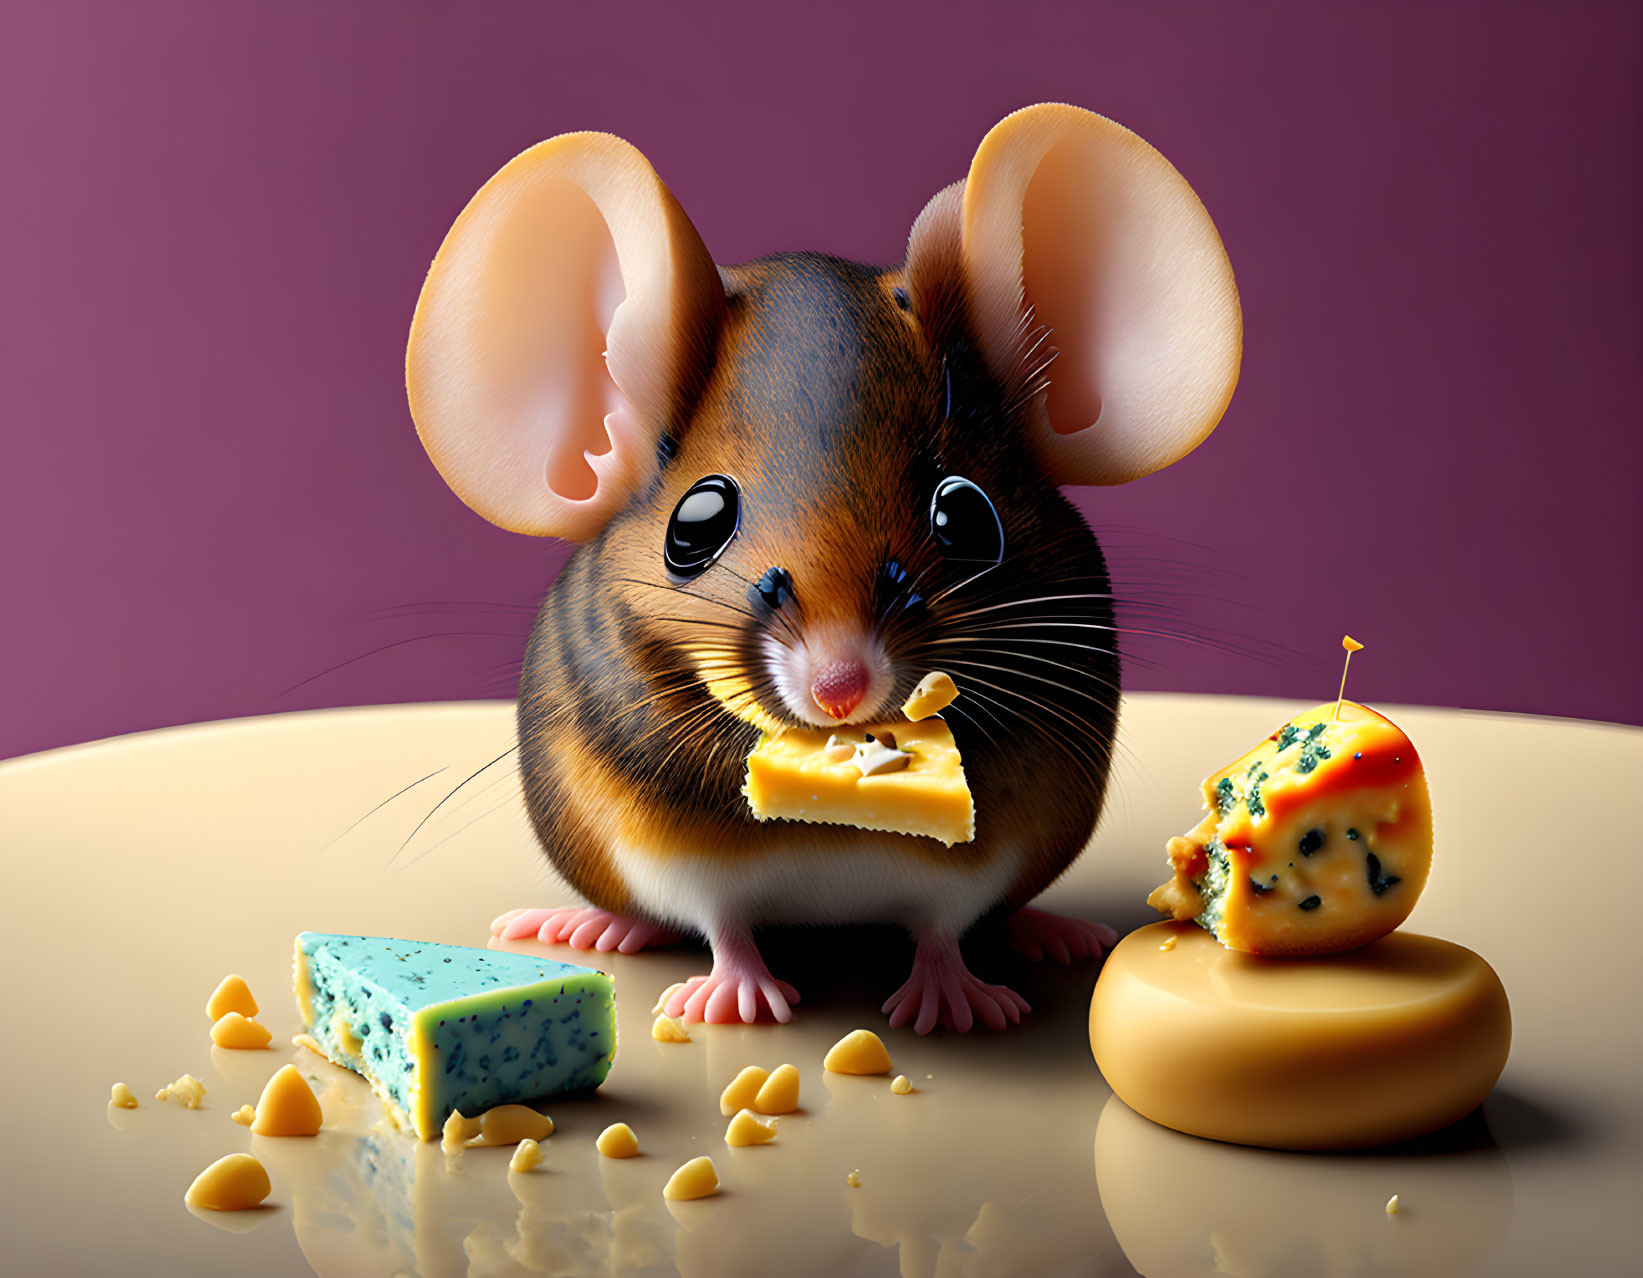 Cartoonish mouse surrounded by cheese types and crumbs